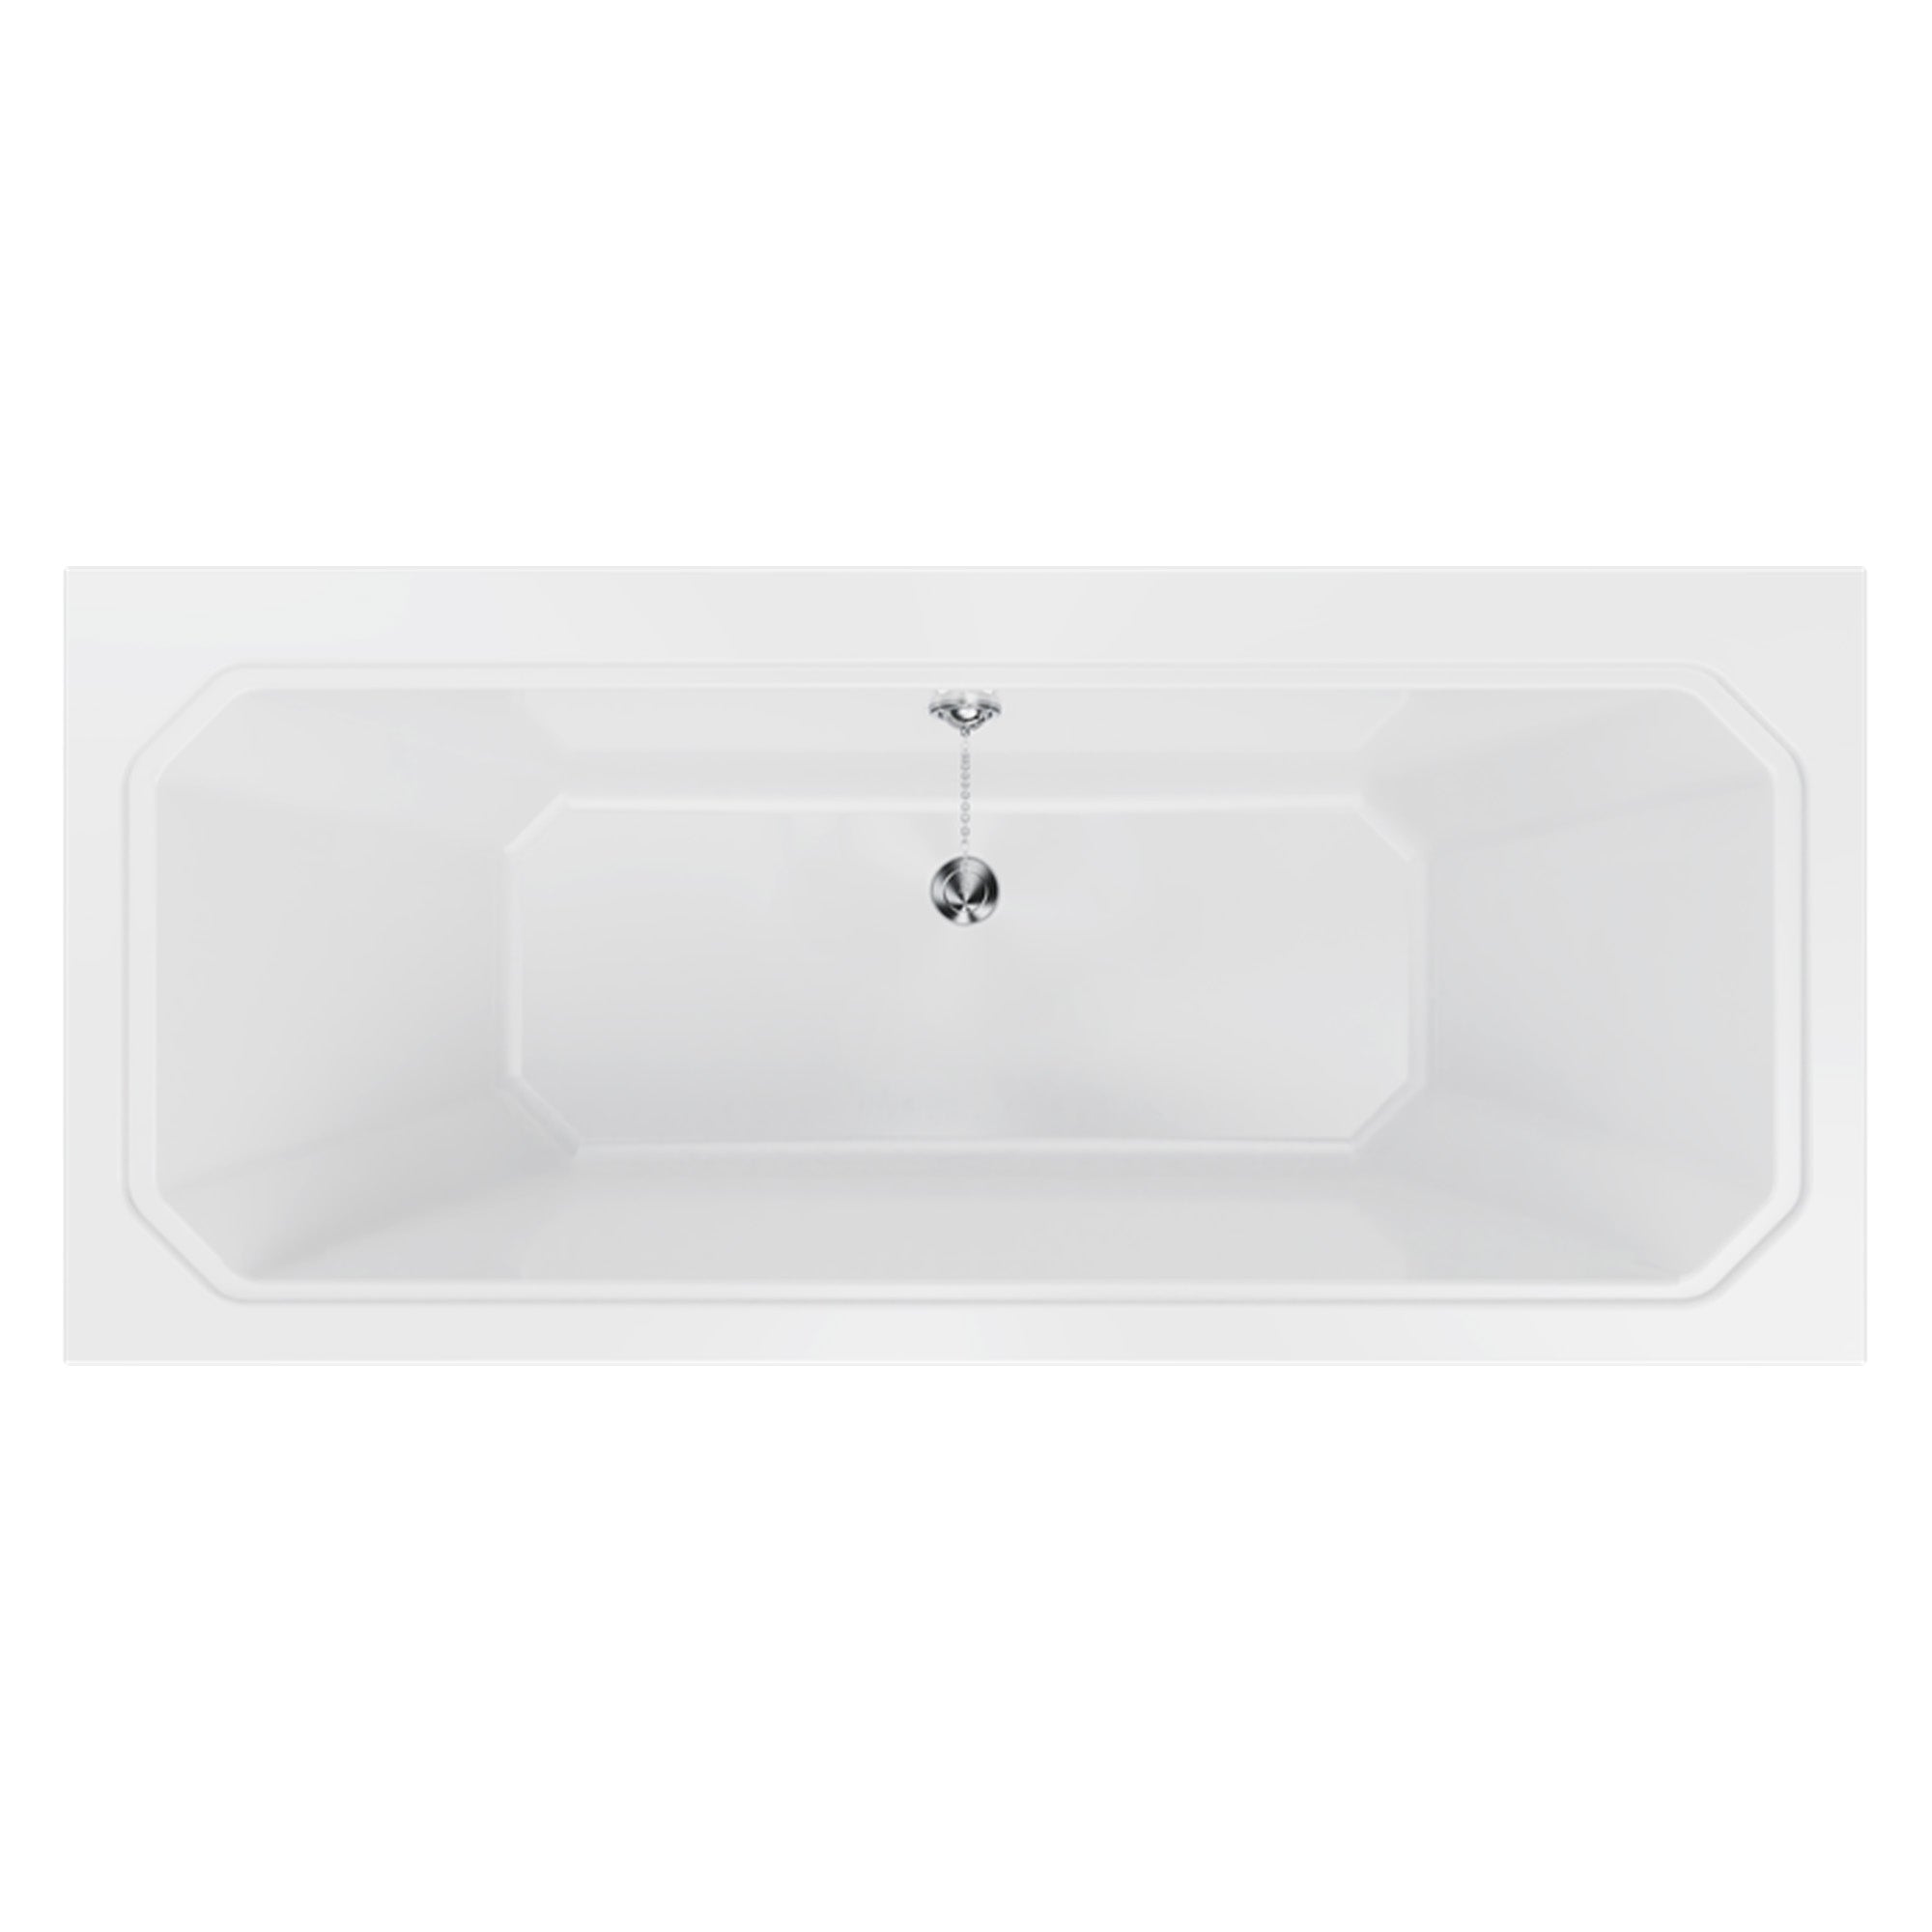 burlington arundel cleargreen double ended back to wall acrylic bath 1700x750mm